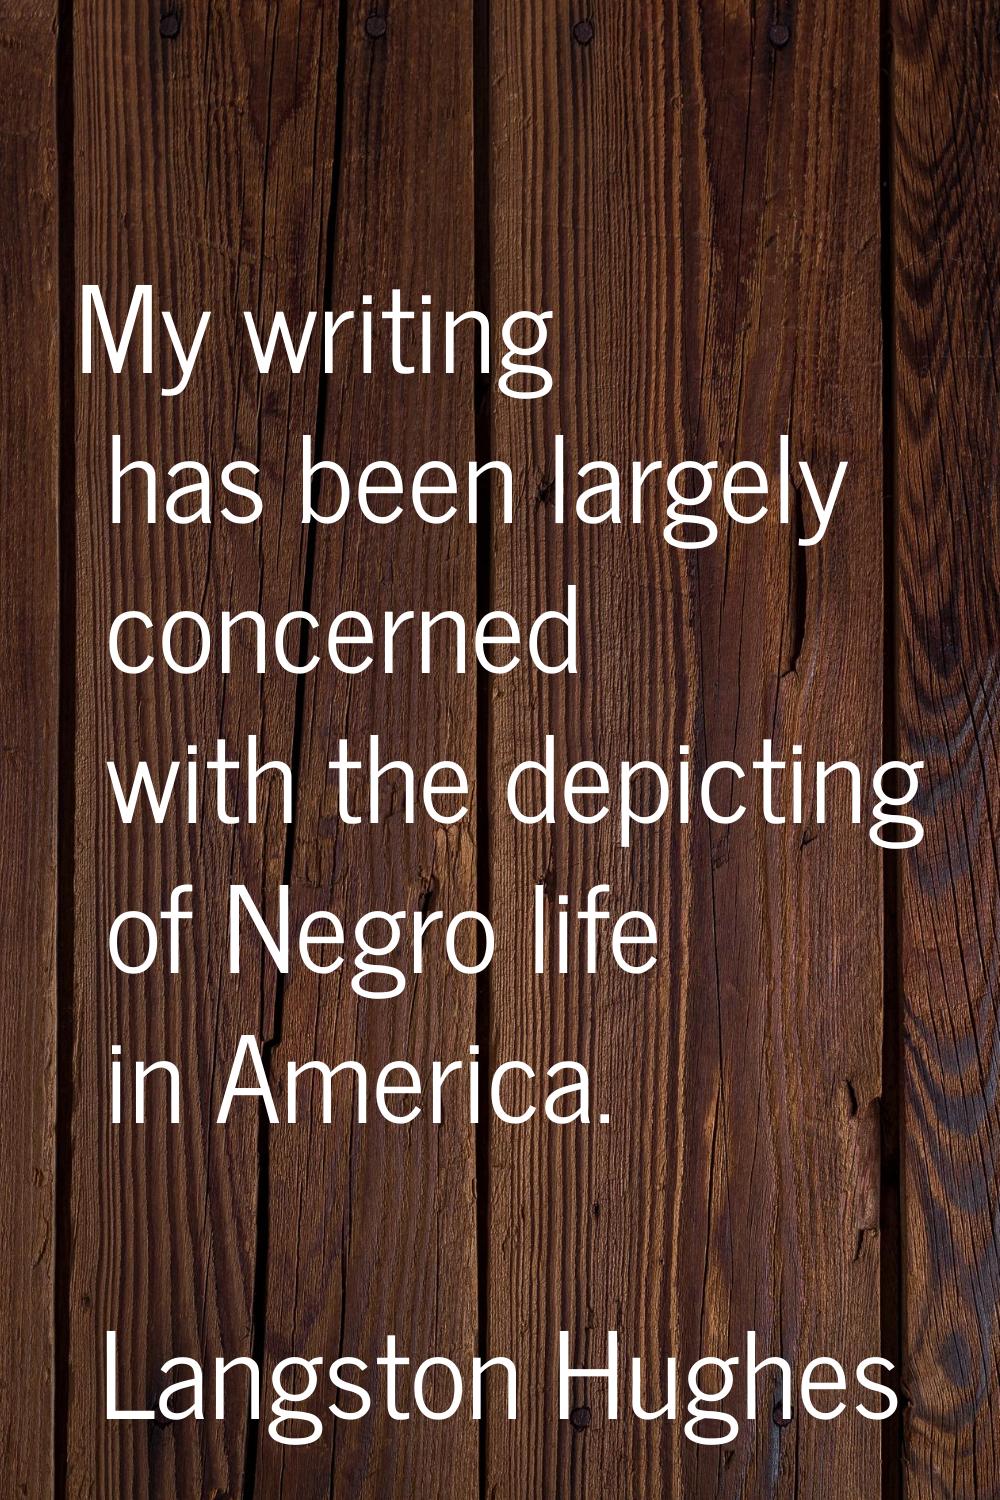 My writing has been largely concerned with the depicting of Negro life in America.